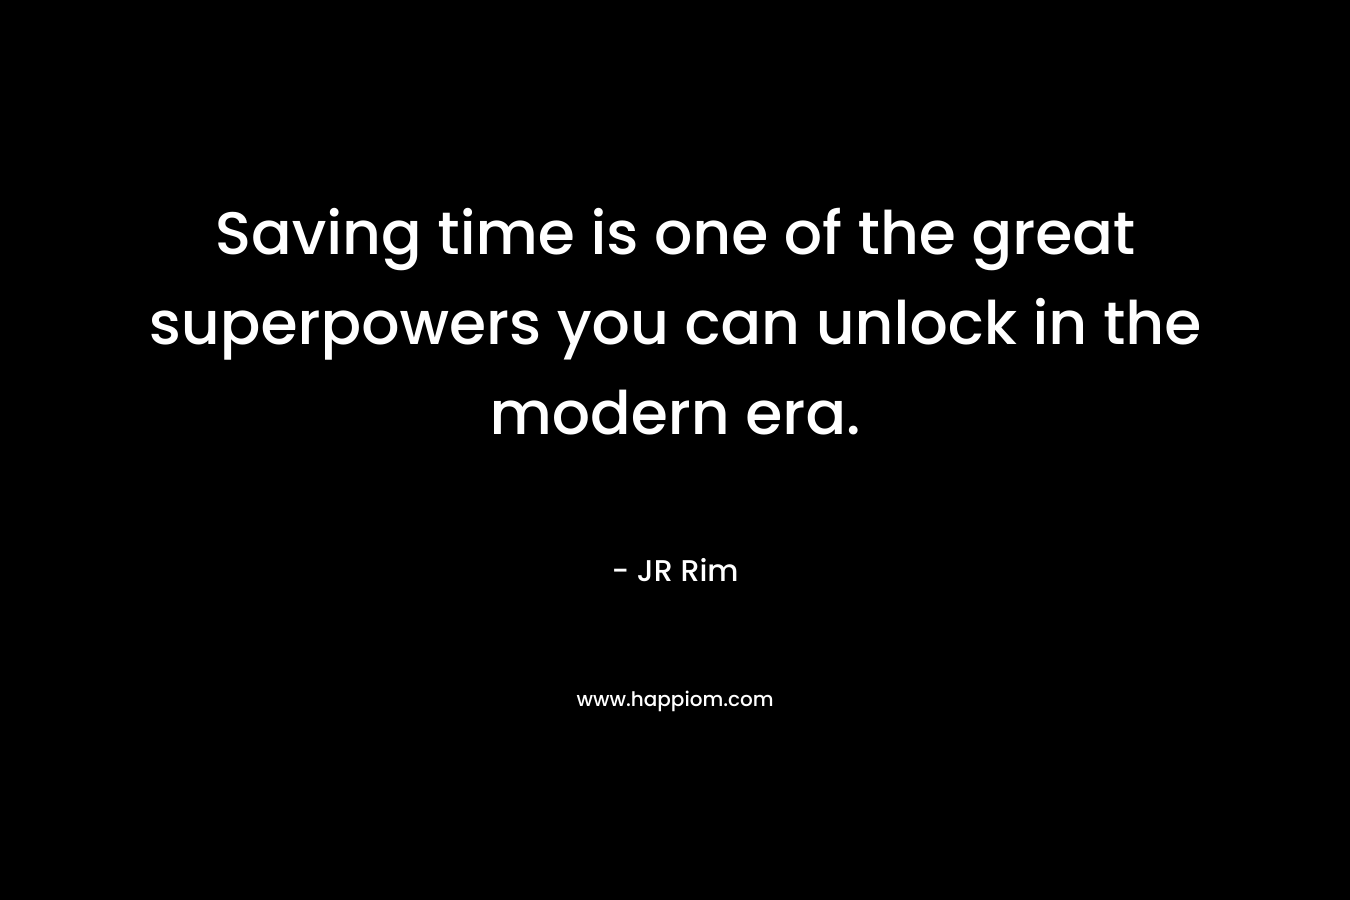 Saving time is one of the great superpowers you can unlock in the modern era.